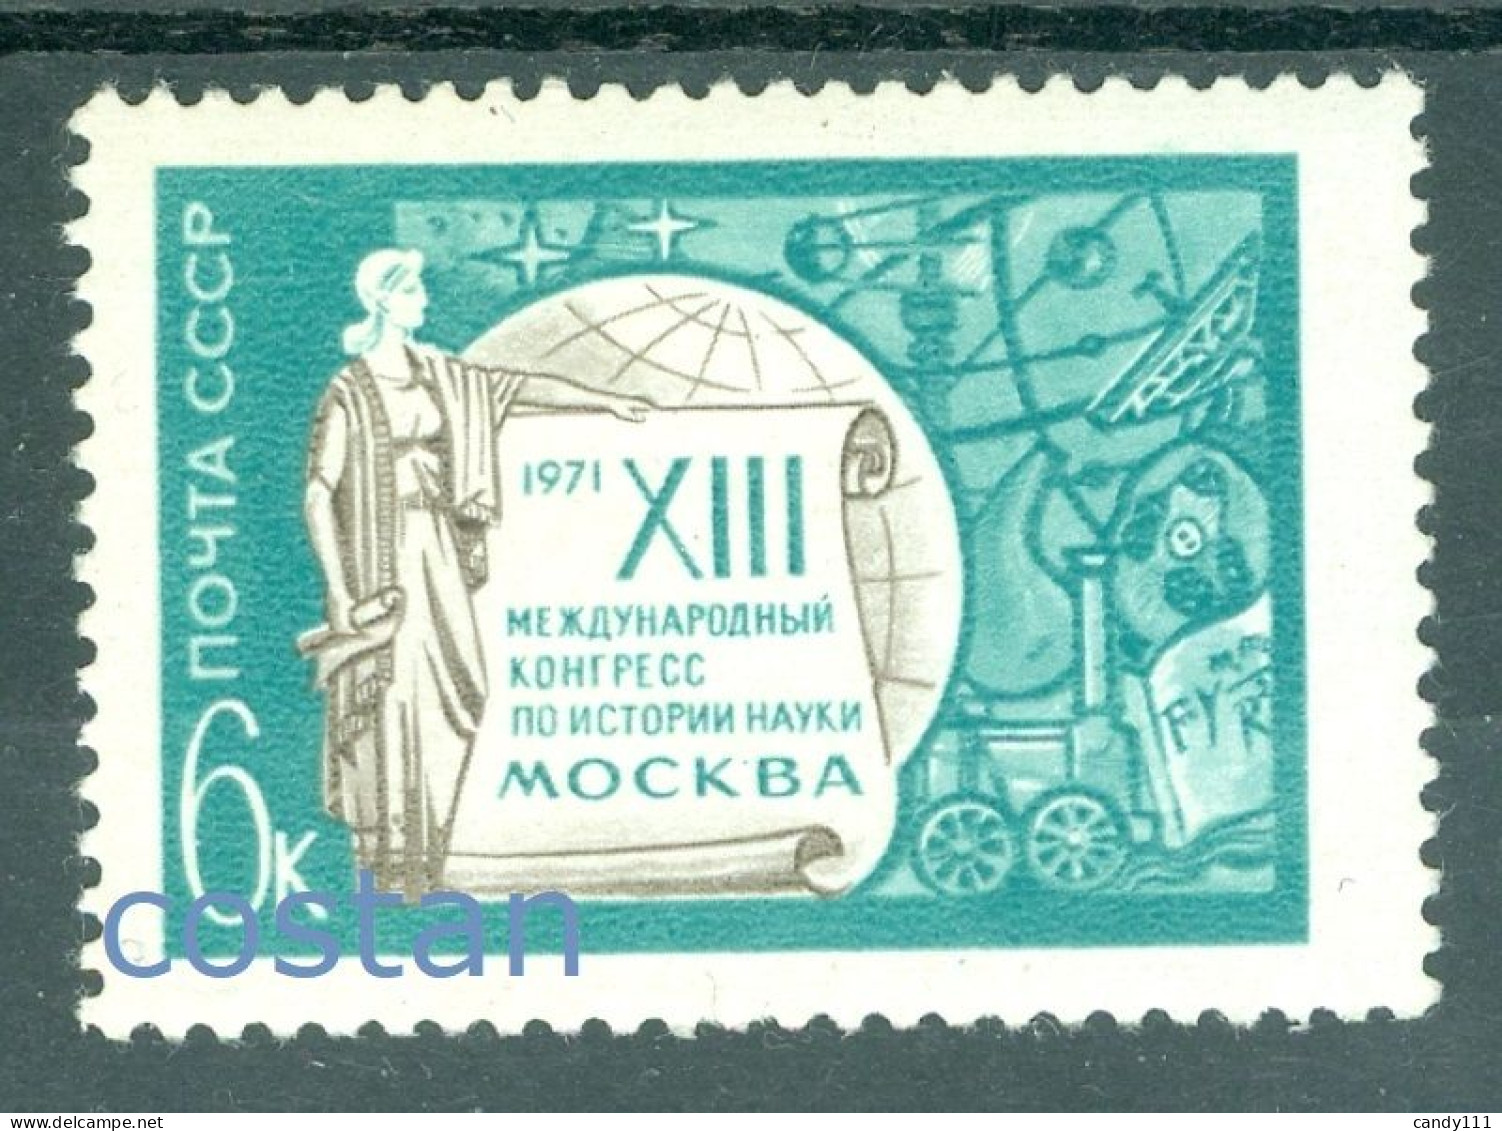 1971 History Of Science Congress/Moscow,locomotive,antenna,star,Russia,3884,MNH - Ungebraucht